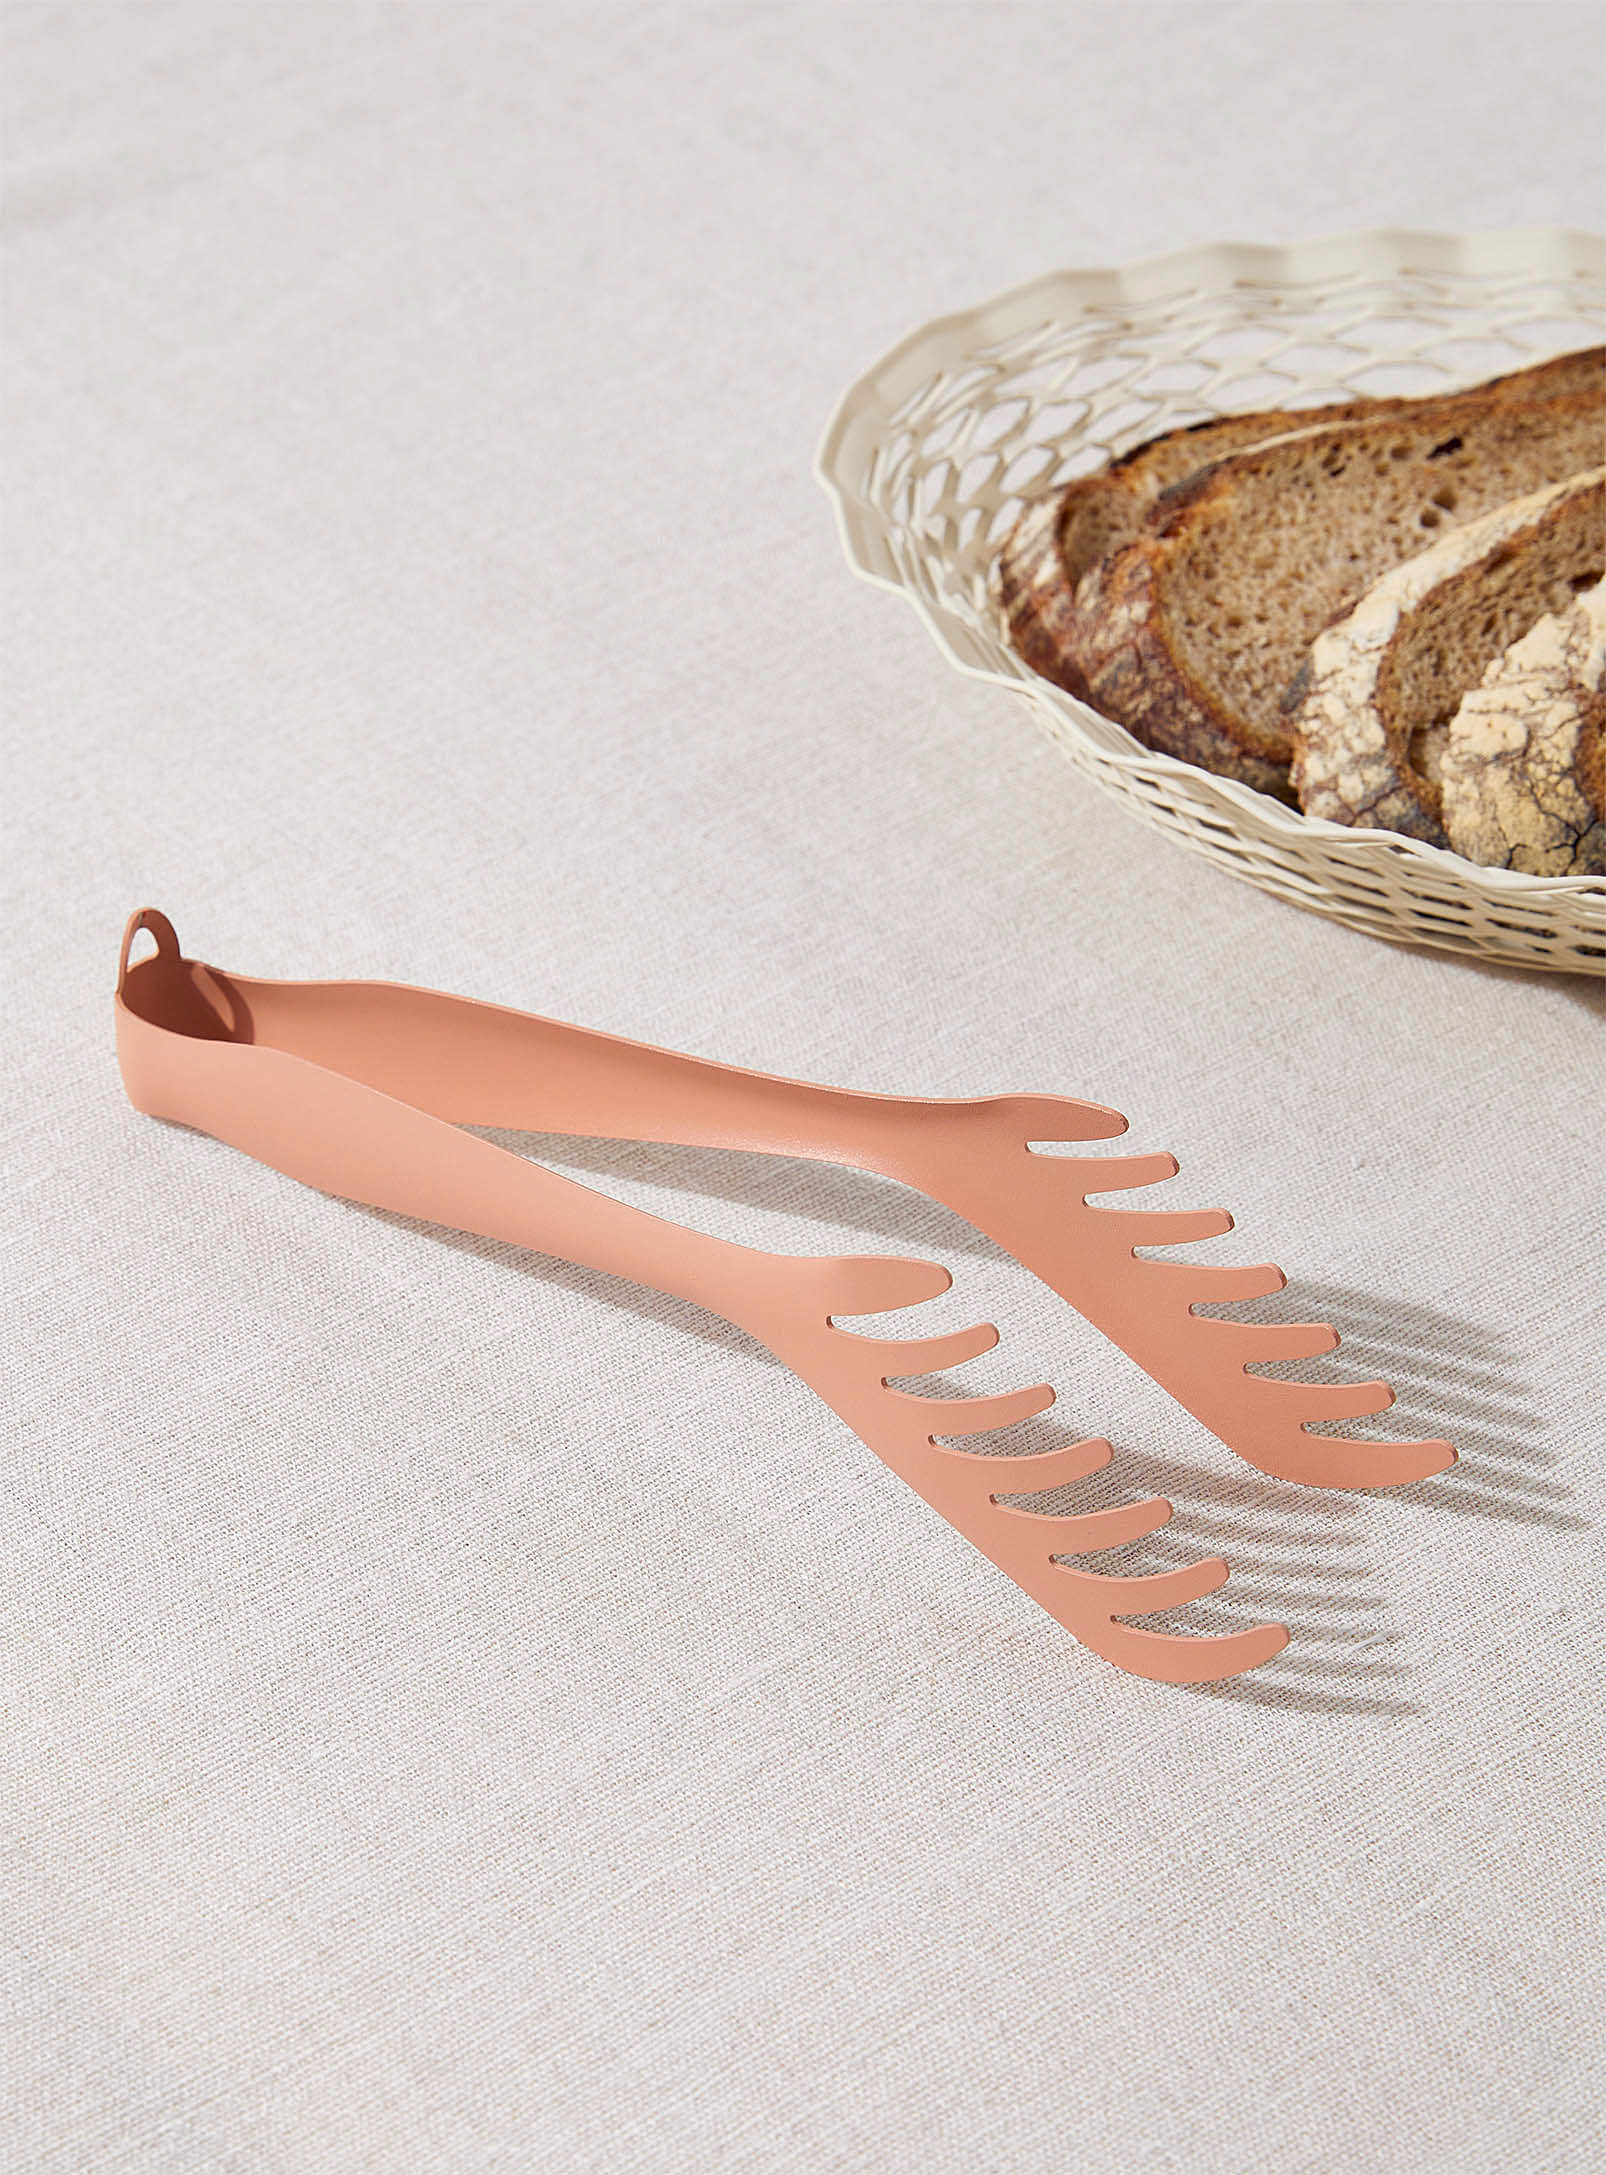 Simons Maison Peach-coloured Kitchen Tongs In Pink